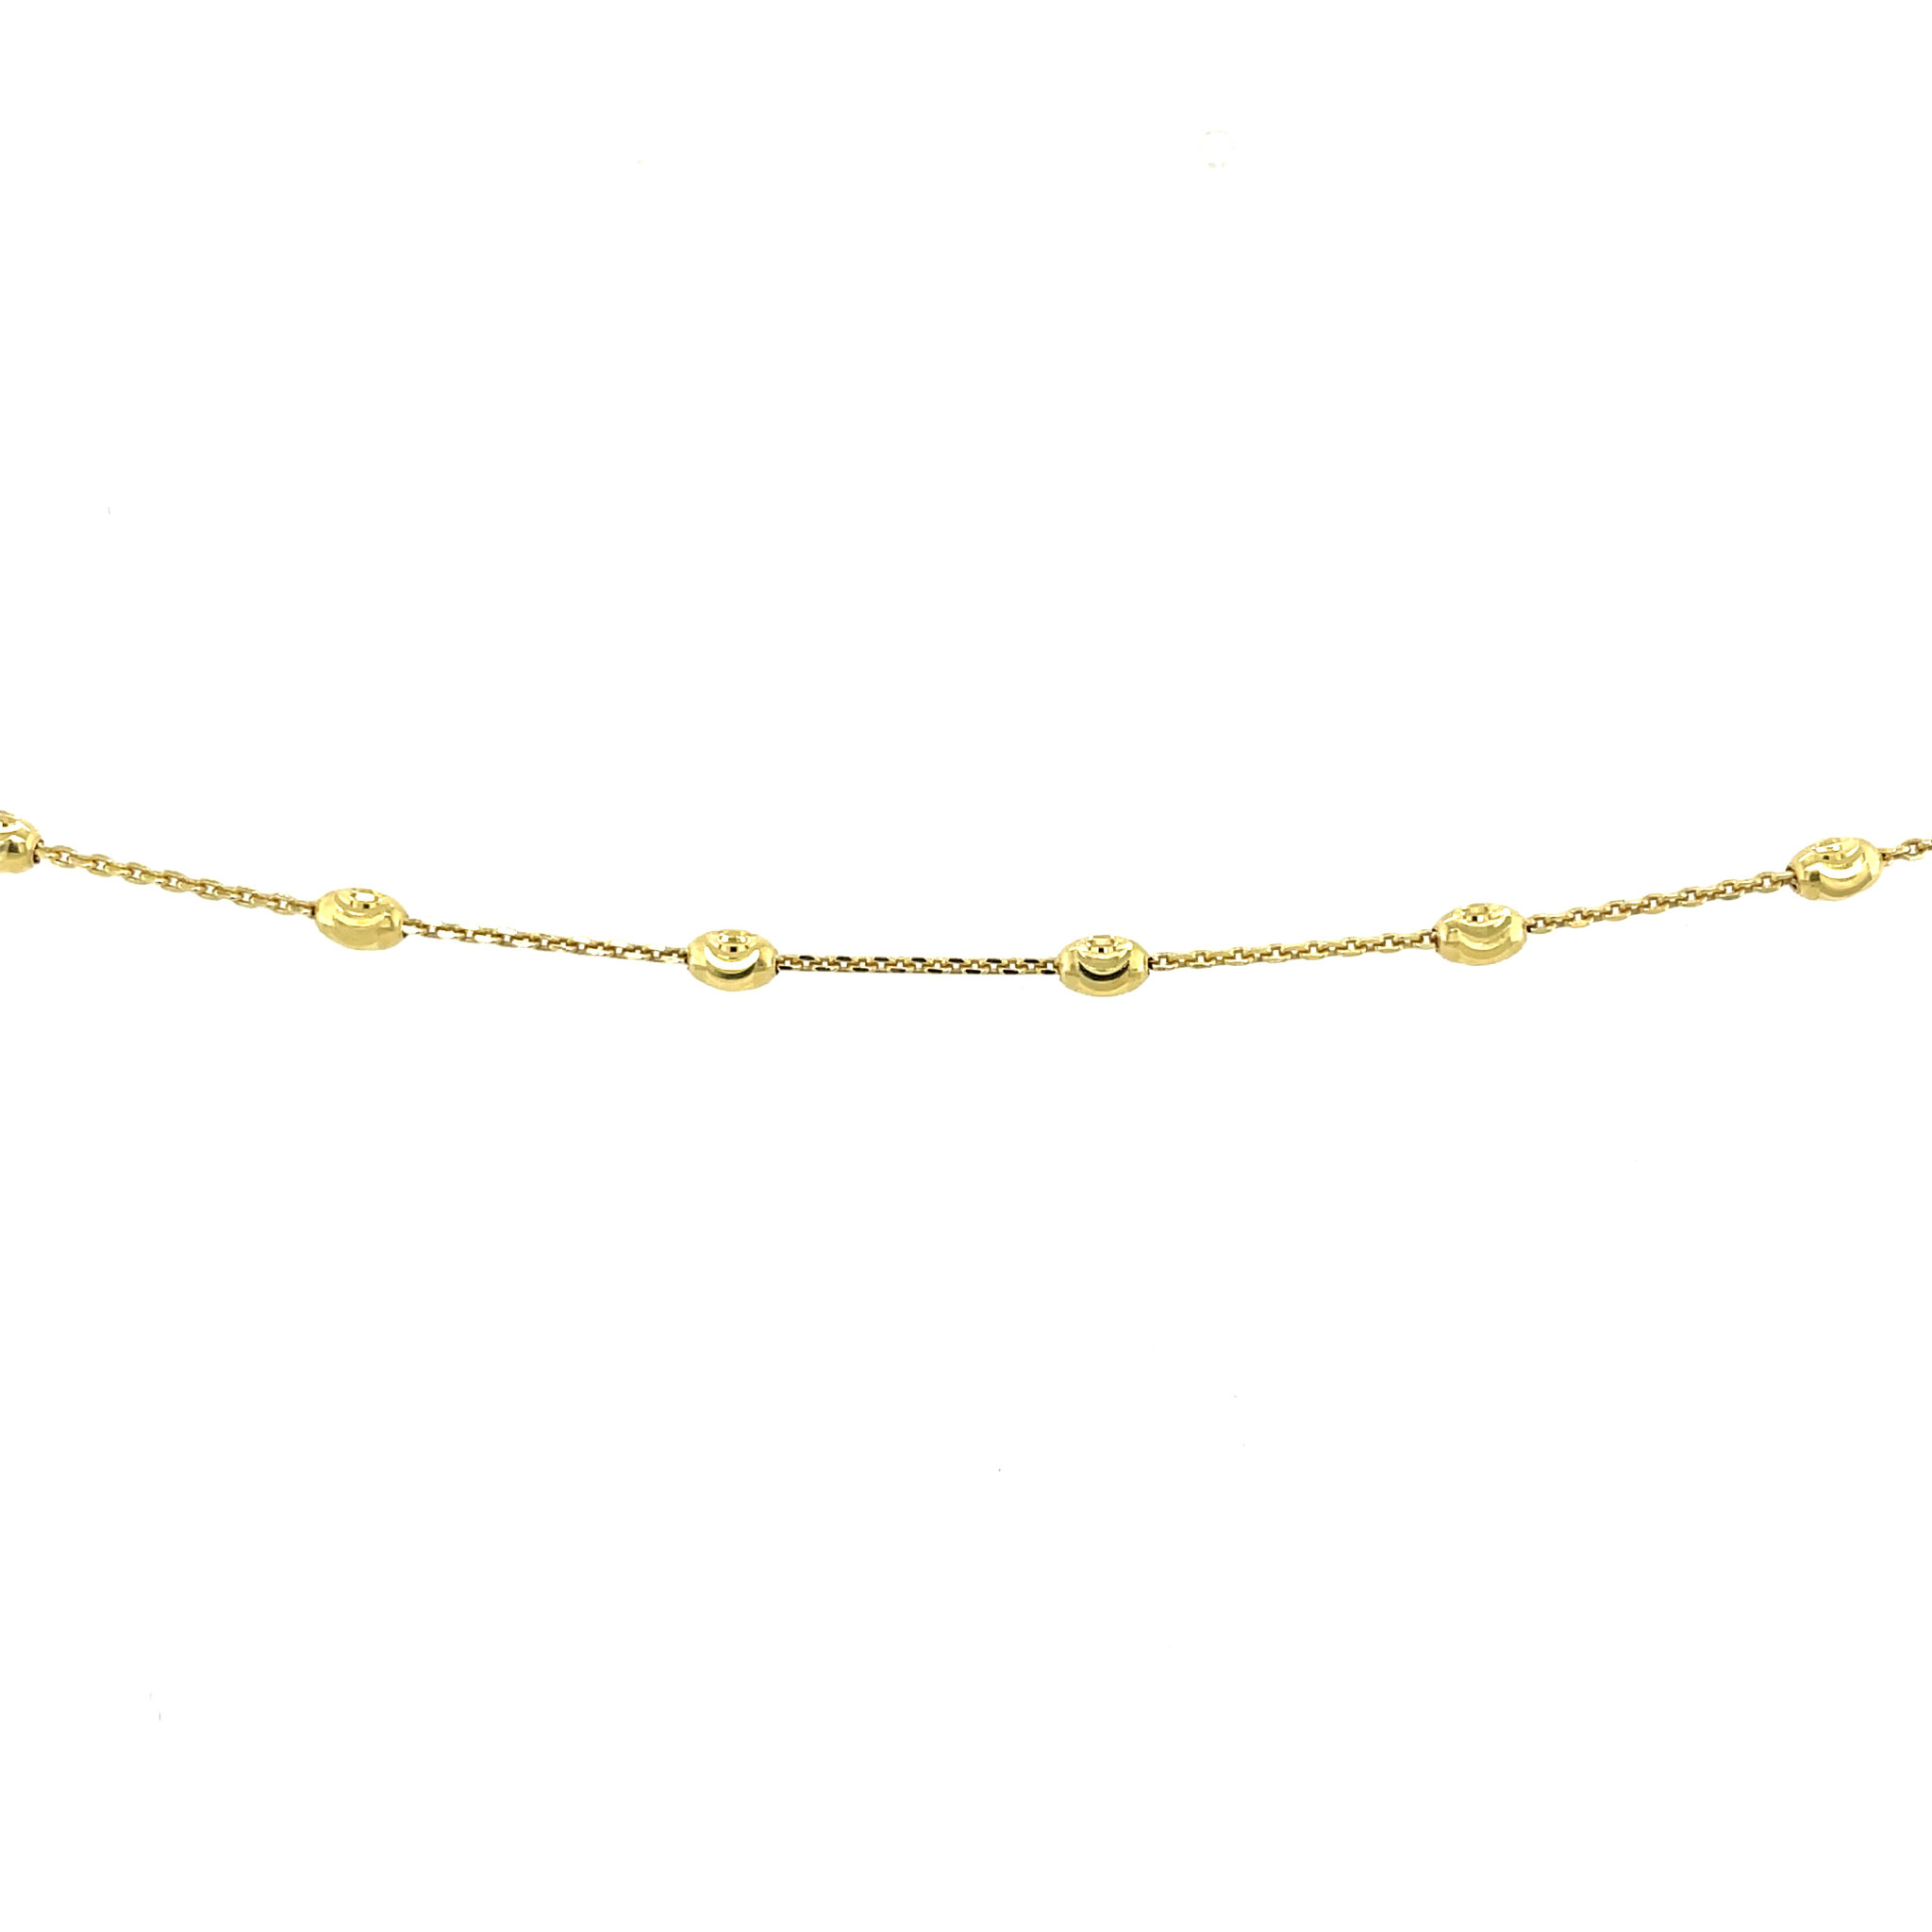 20157 14K YELLOW GOLD DIAMOND CUT MOON BEADED CABLE LINK 10" LADIES ANKLET